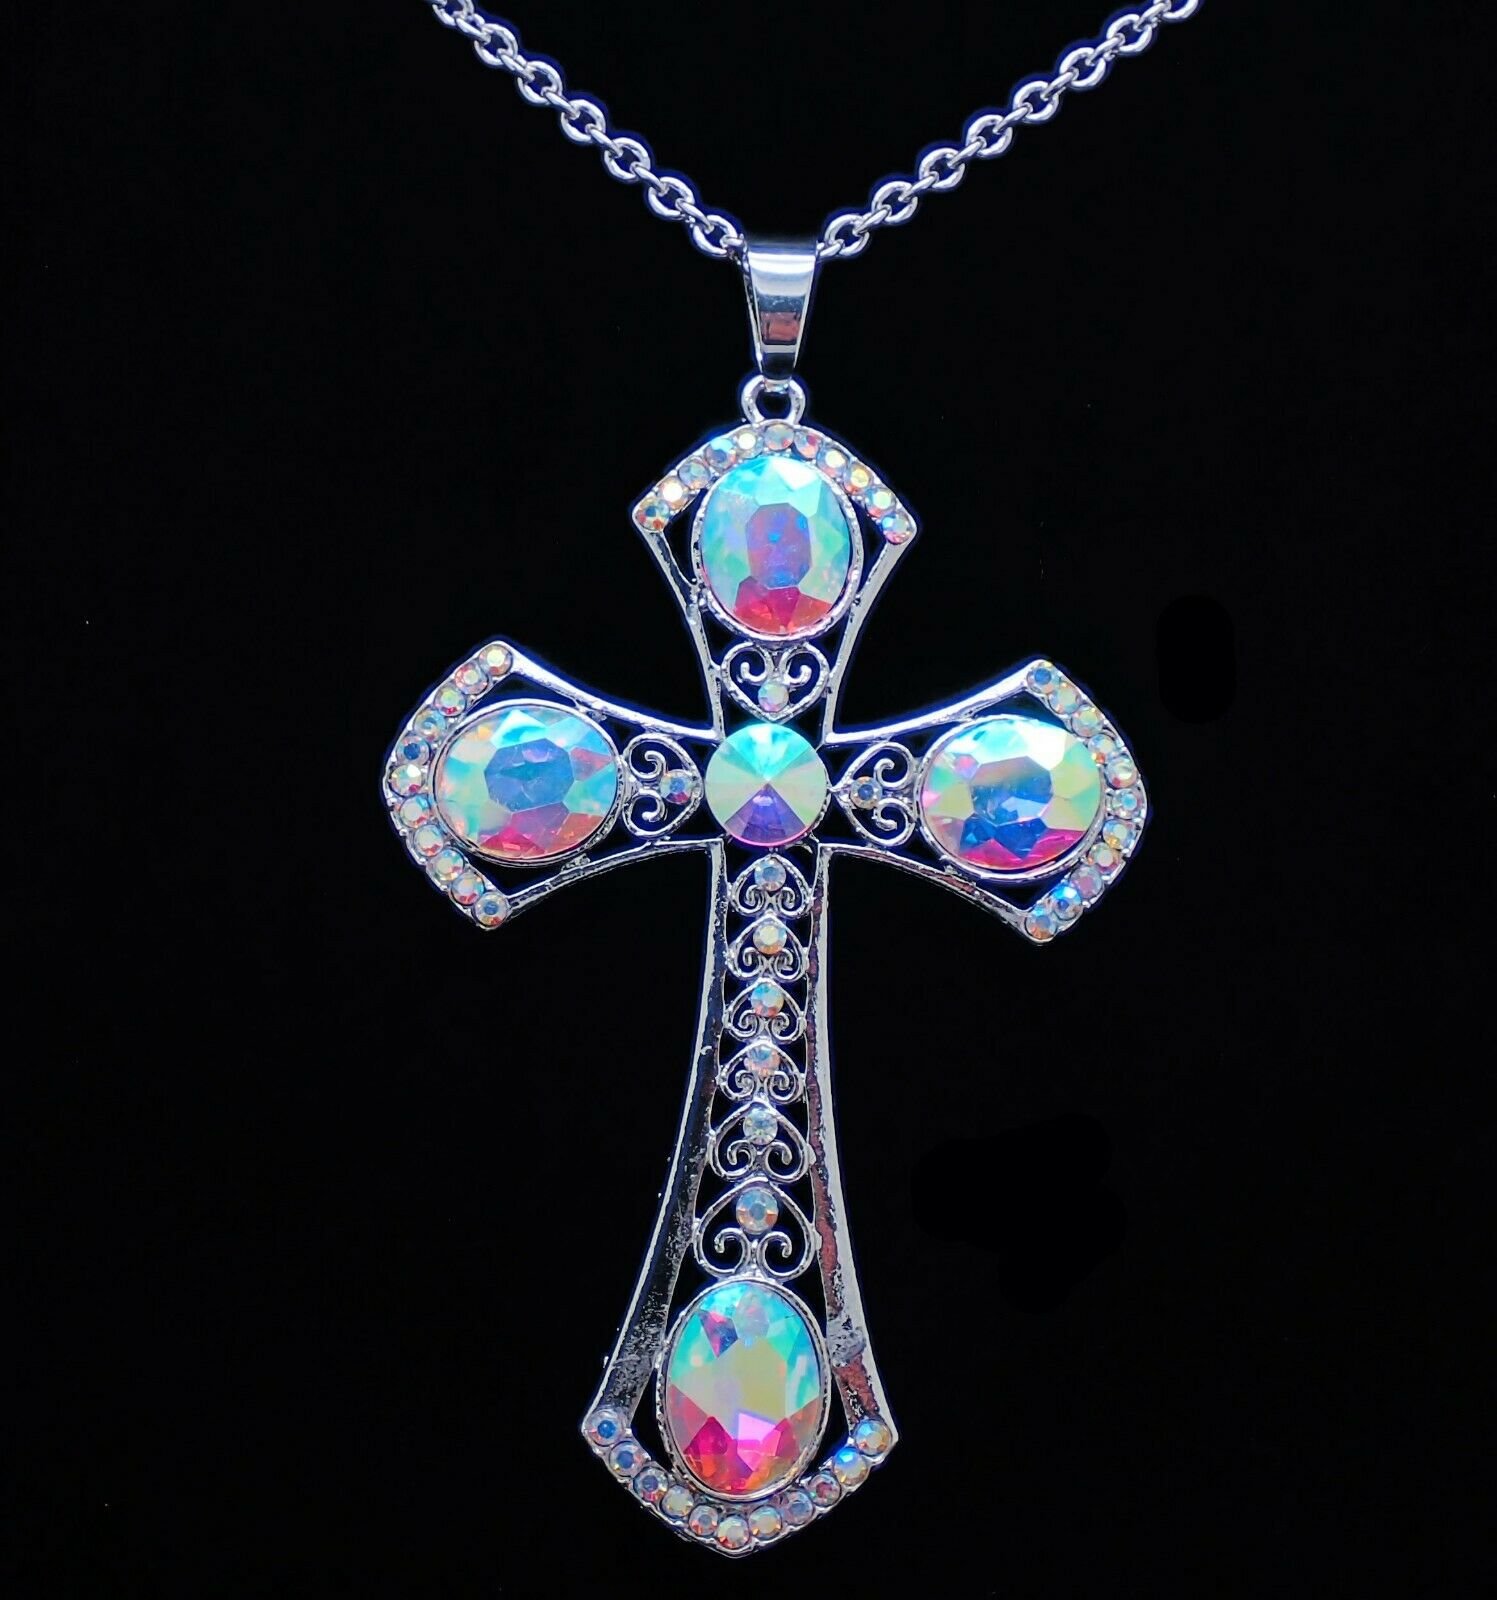 Large Cross Pendent Necklace, AB, Clear, Black or Pink Gems